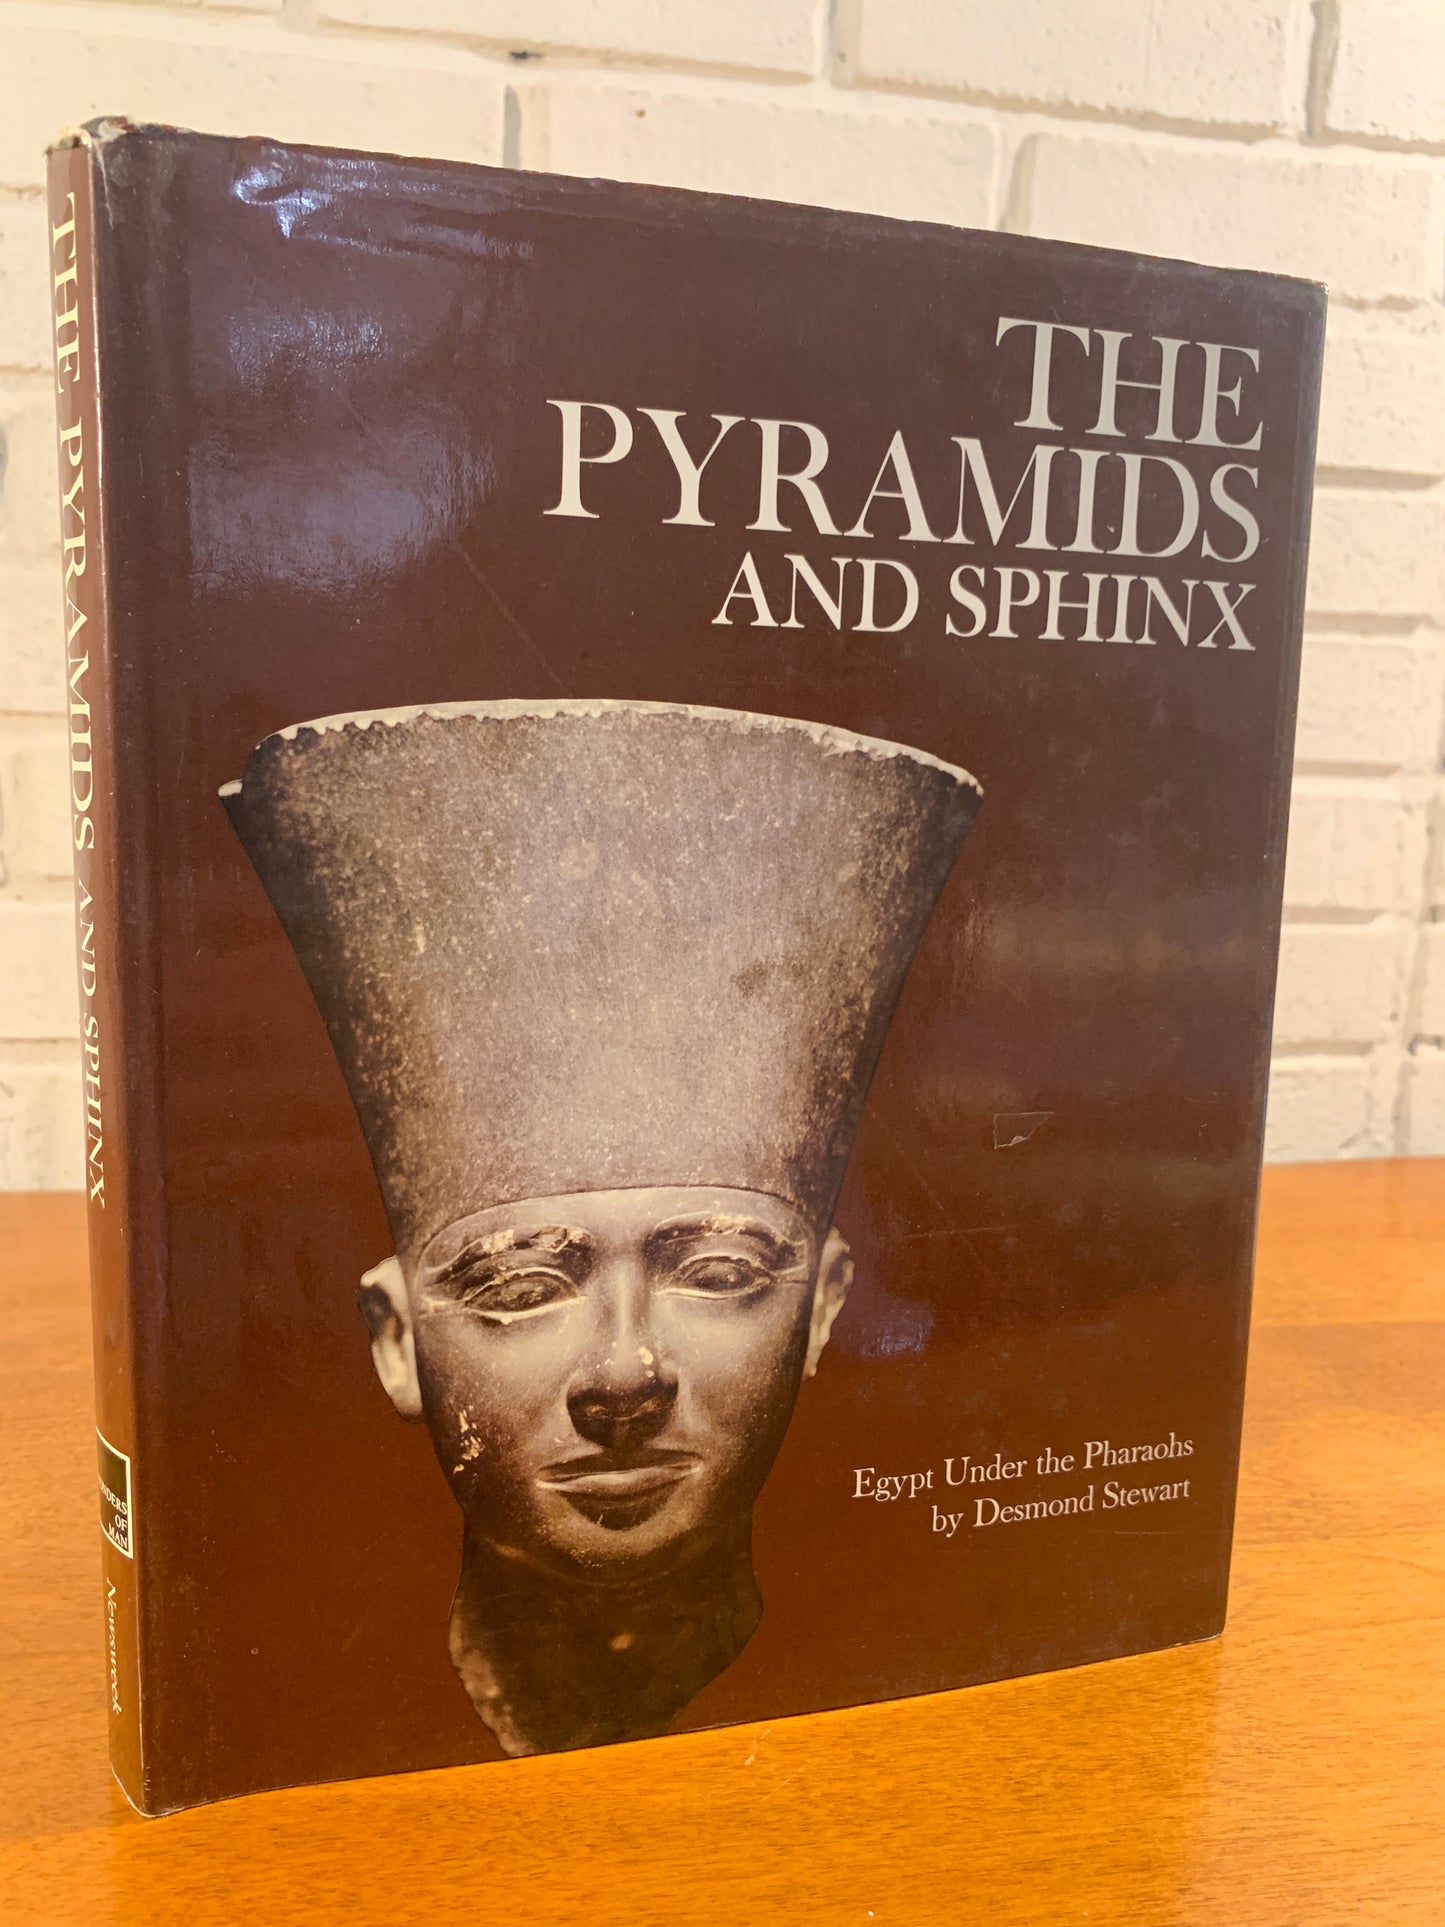 The Pyramids And Sphinx: Eqypt under the Pharaohs by Desmond Stewart